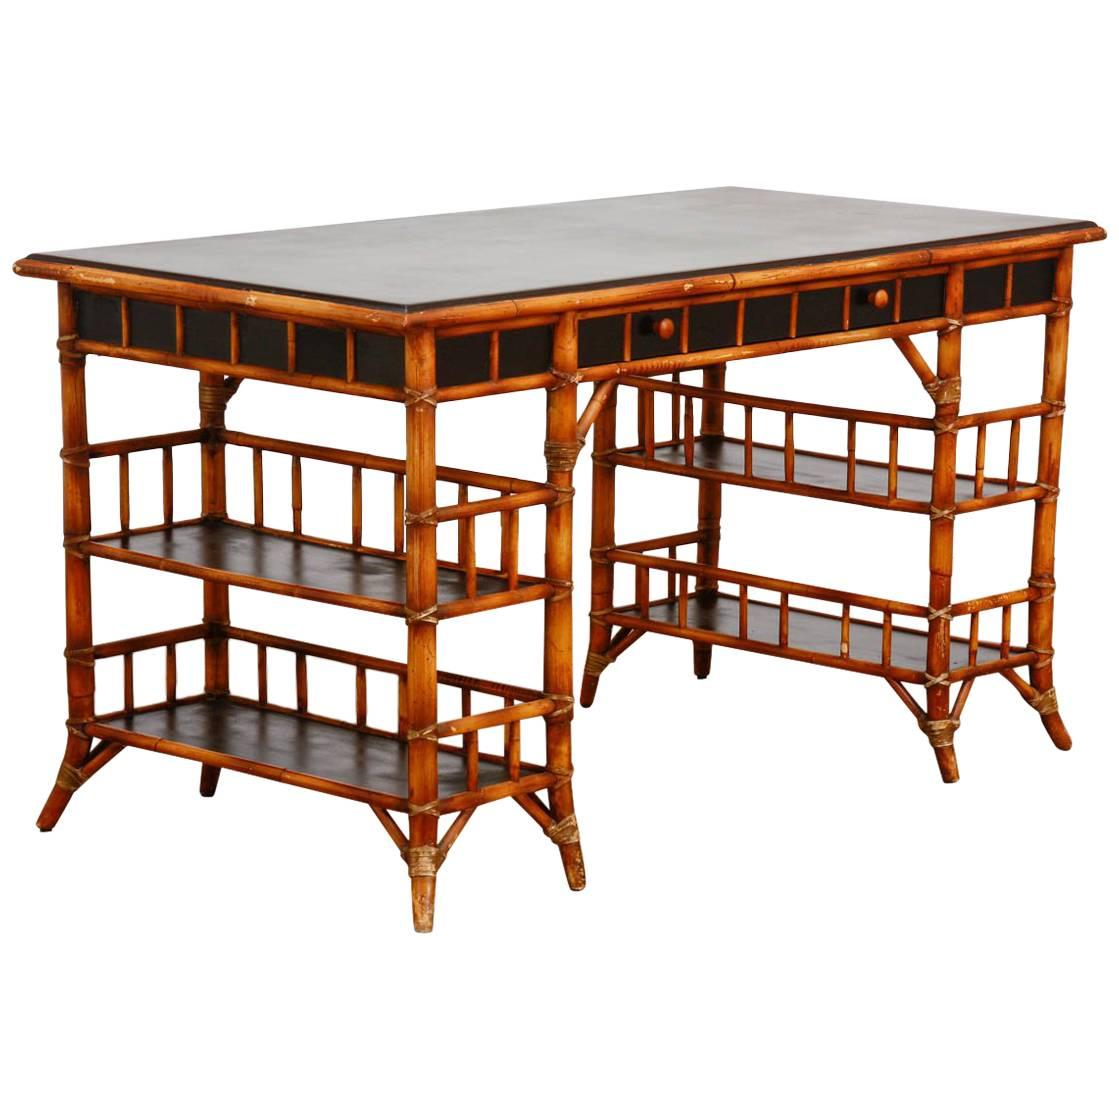 English Chinoiserie Style Bamboo Desk by Milling Road for Baker